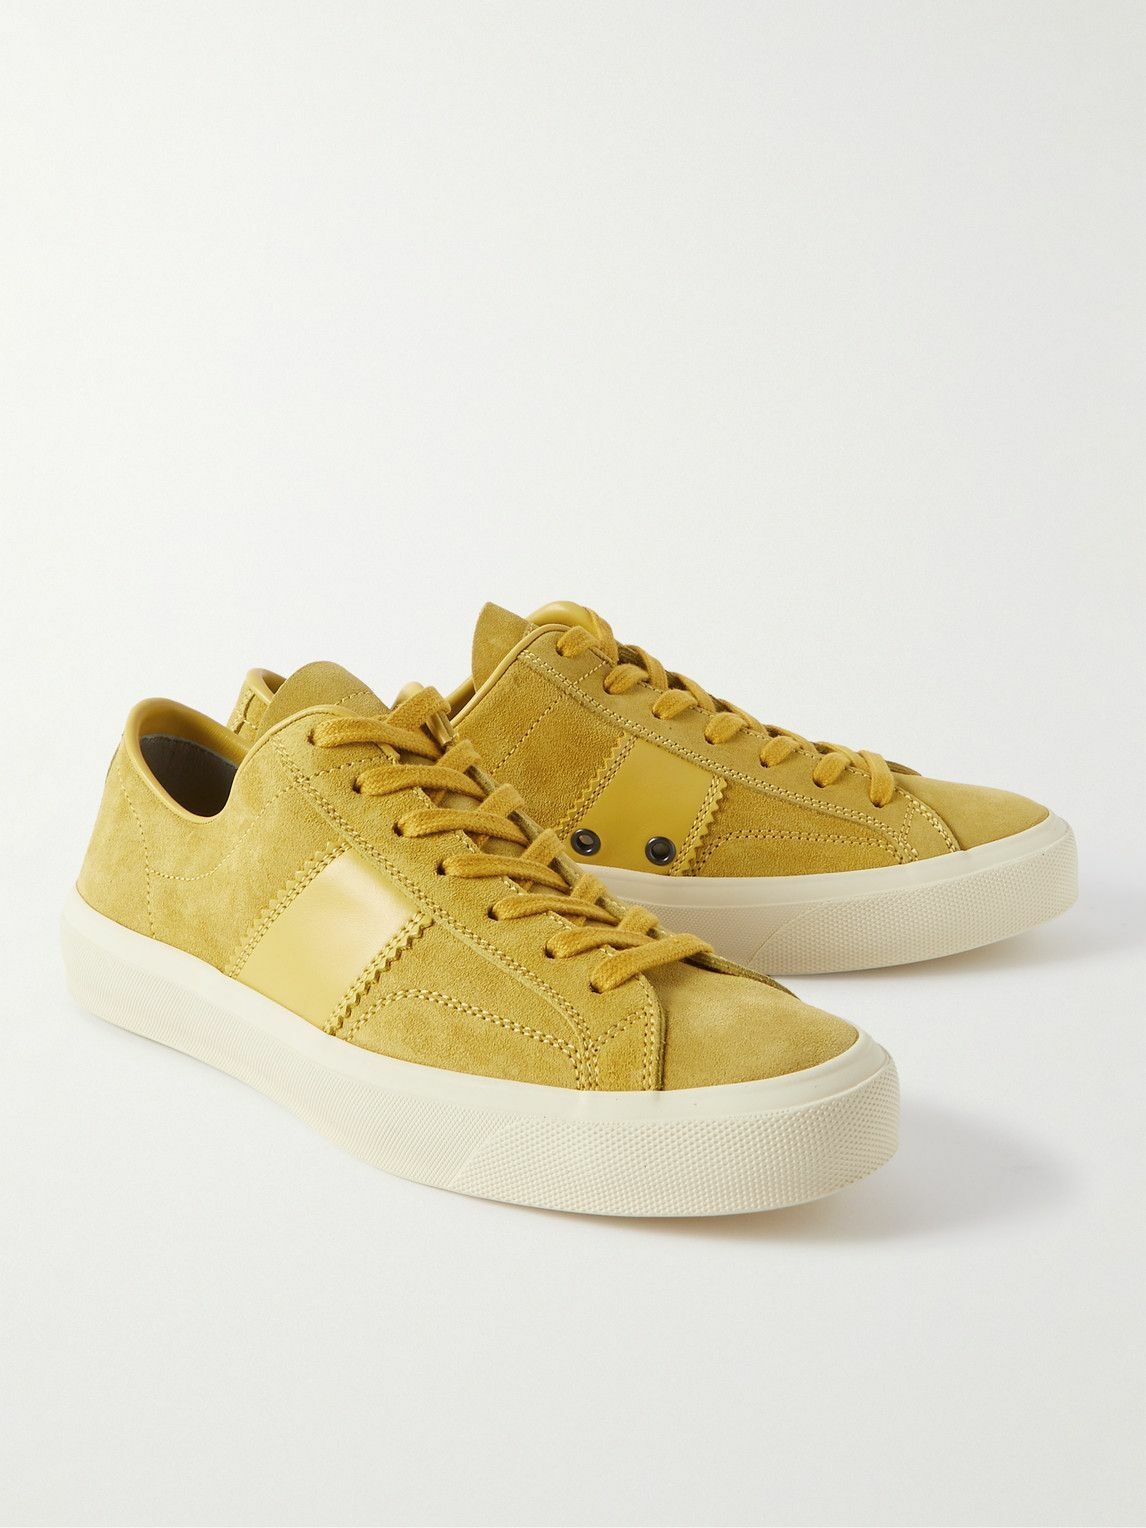 TOM FORD - Cambridge Leather-Trimmed Suede Sneakers - Yellow TOM FORD